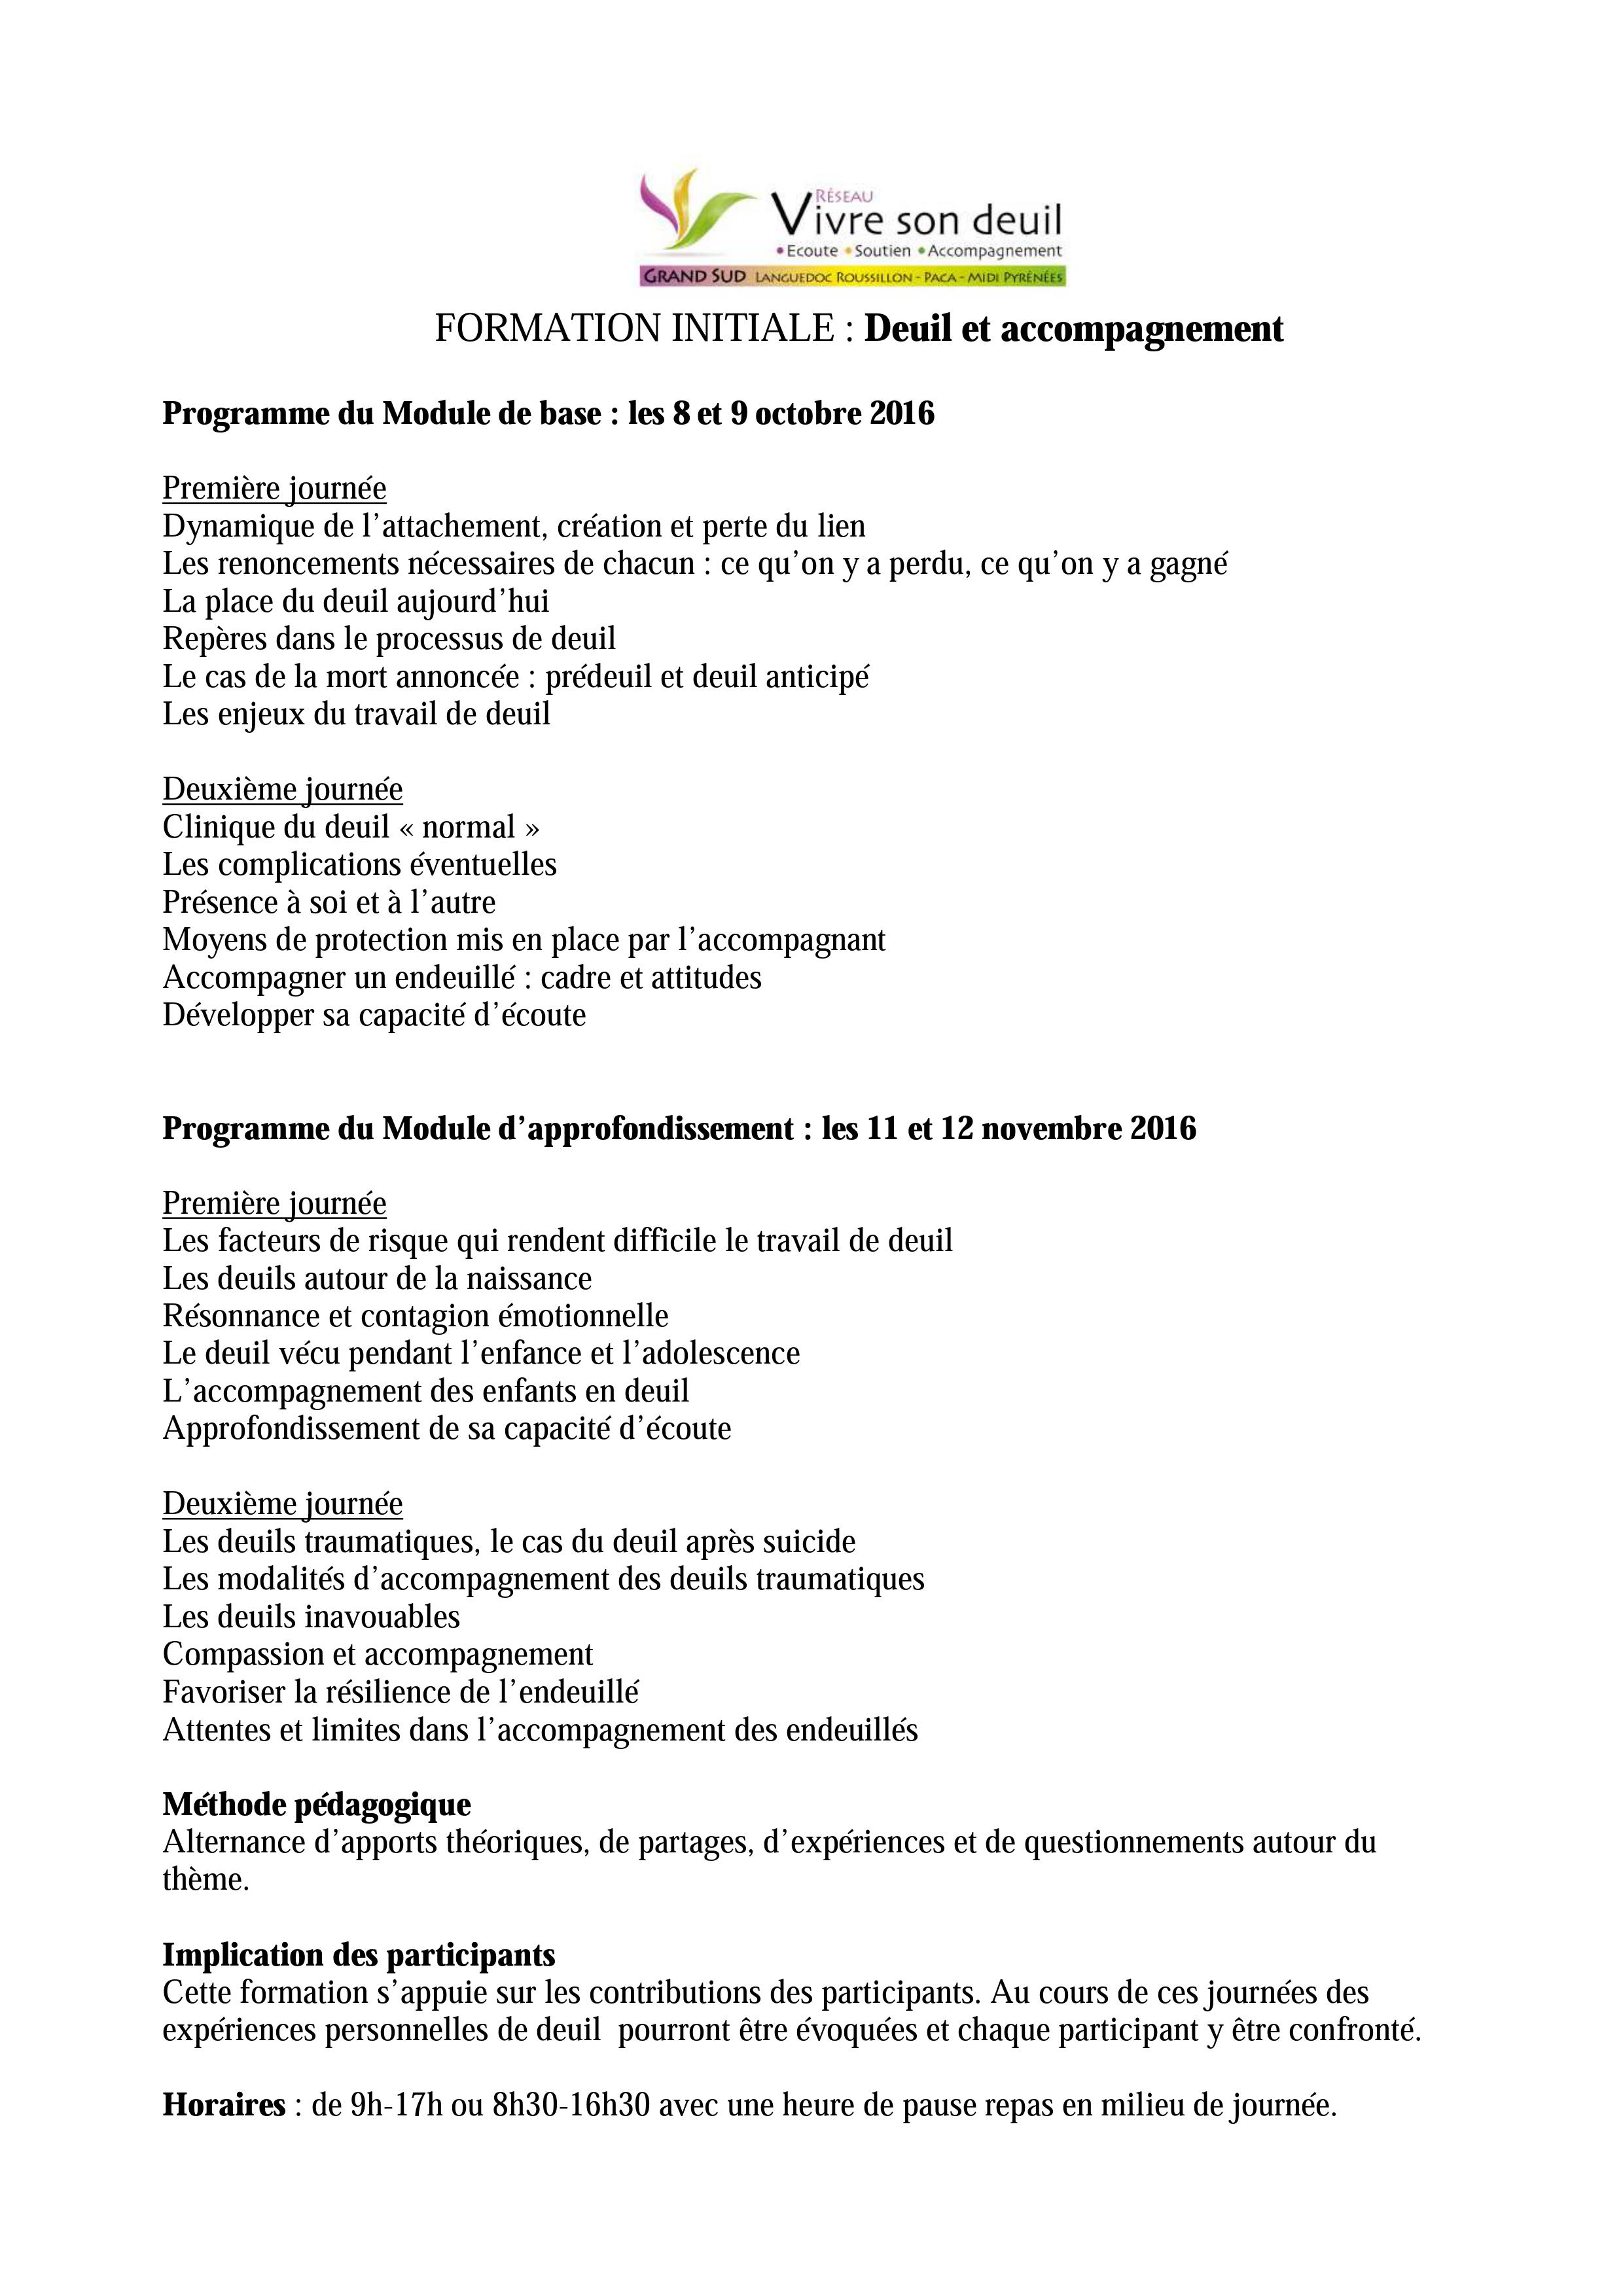 programme-formation-initiale